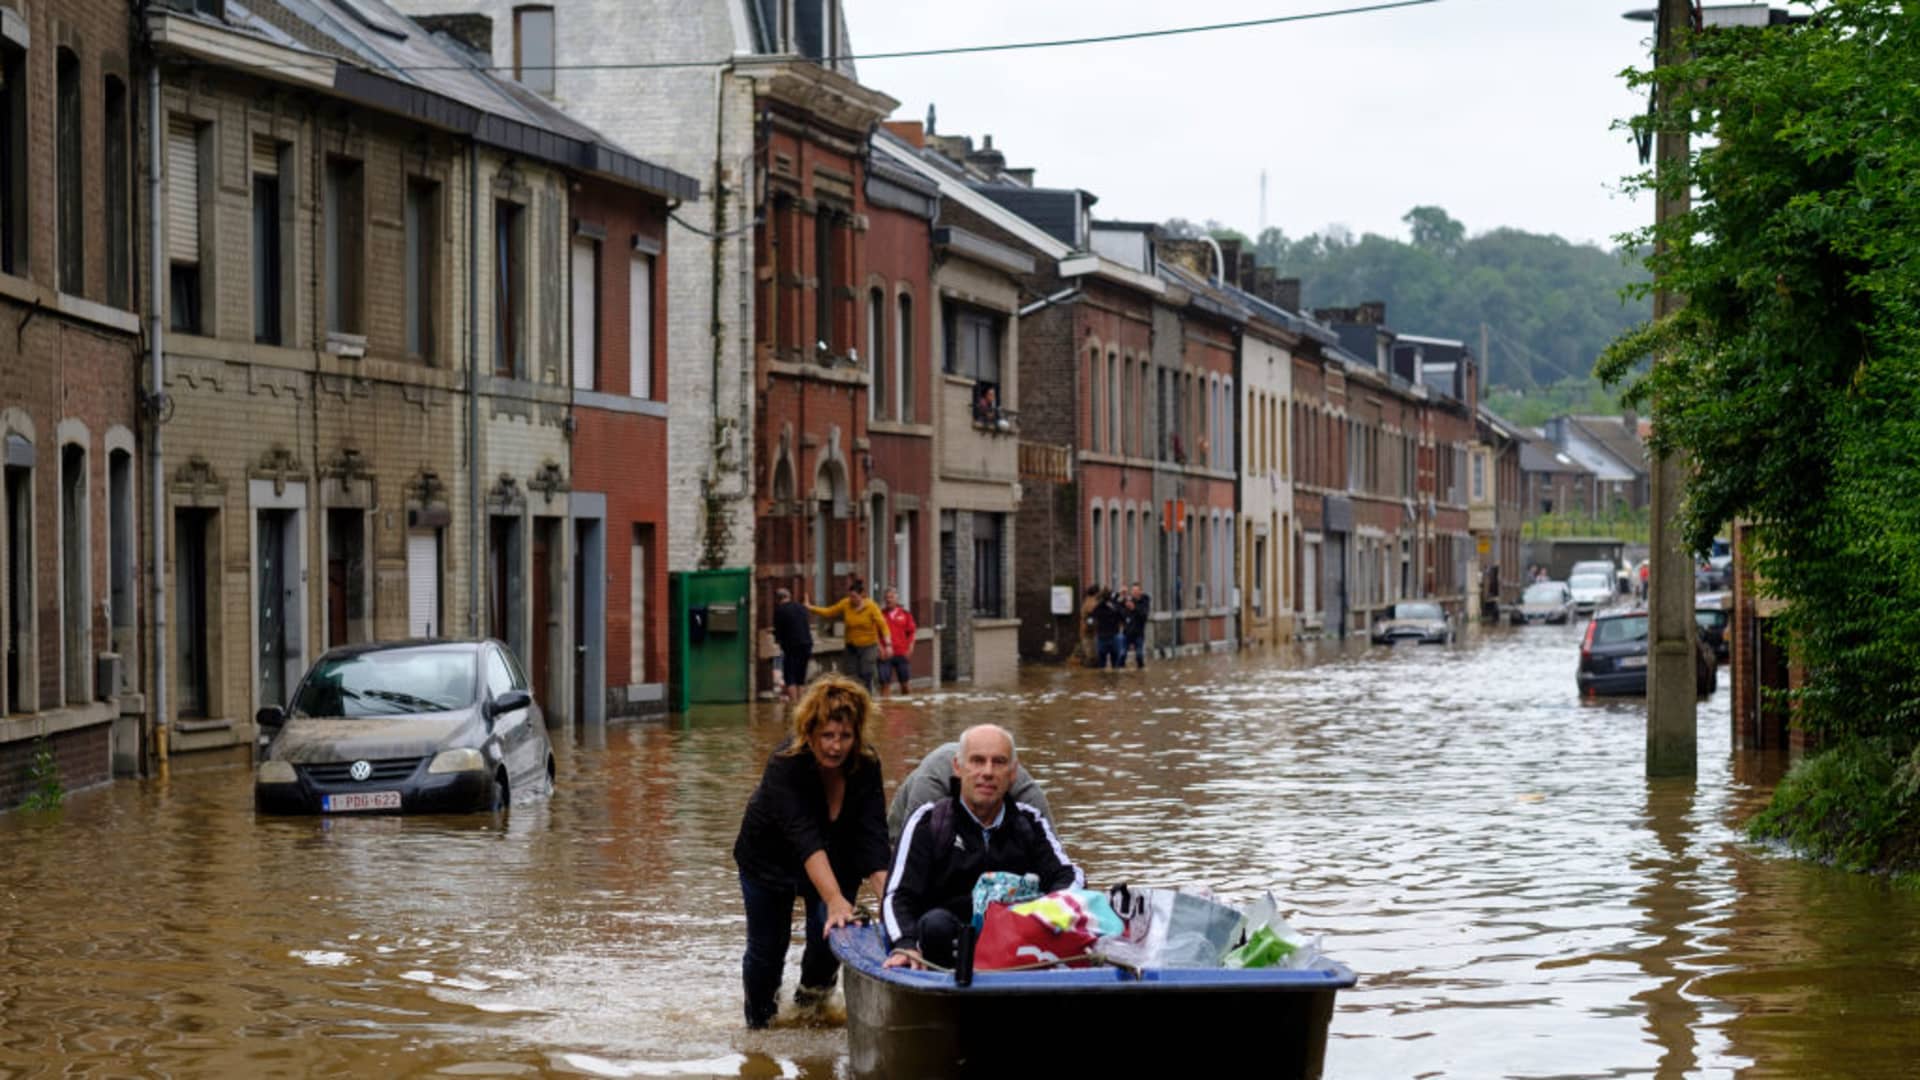 ANGLEUR, LIEGE, BELGIUM - JULY 16: People use a boat to bring man out of home following a severe storm on July 16, 2021 in 'Rue de Tilff' in Angleur, a district from Liège, Belgium.